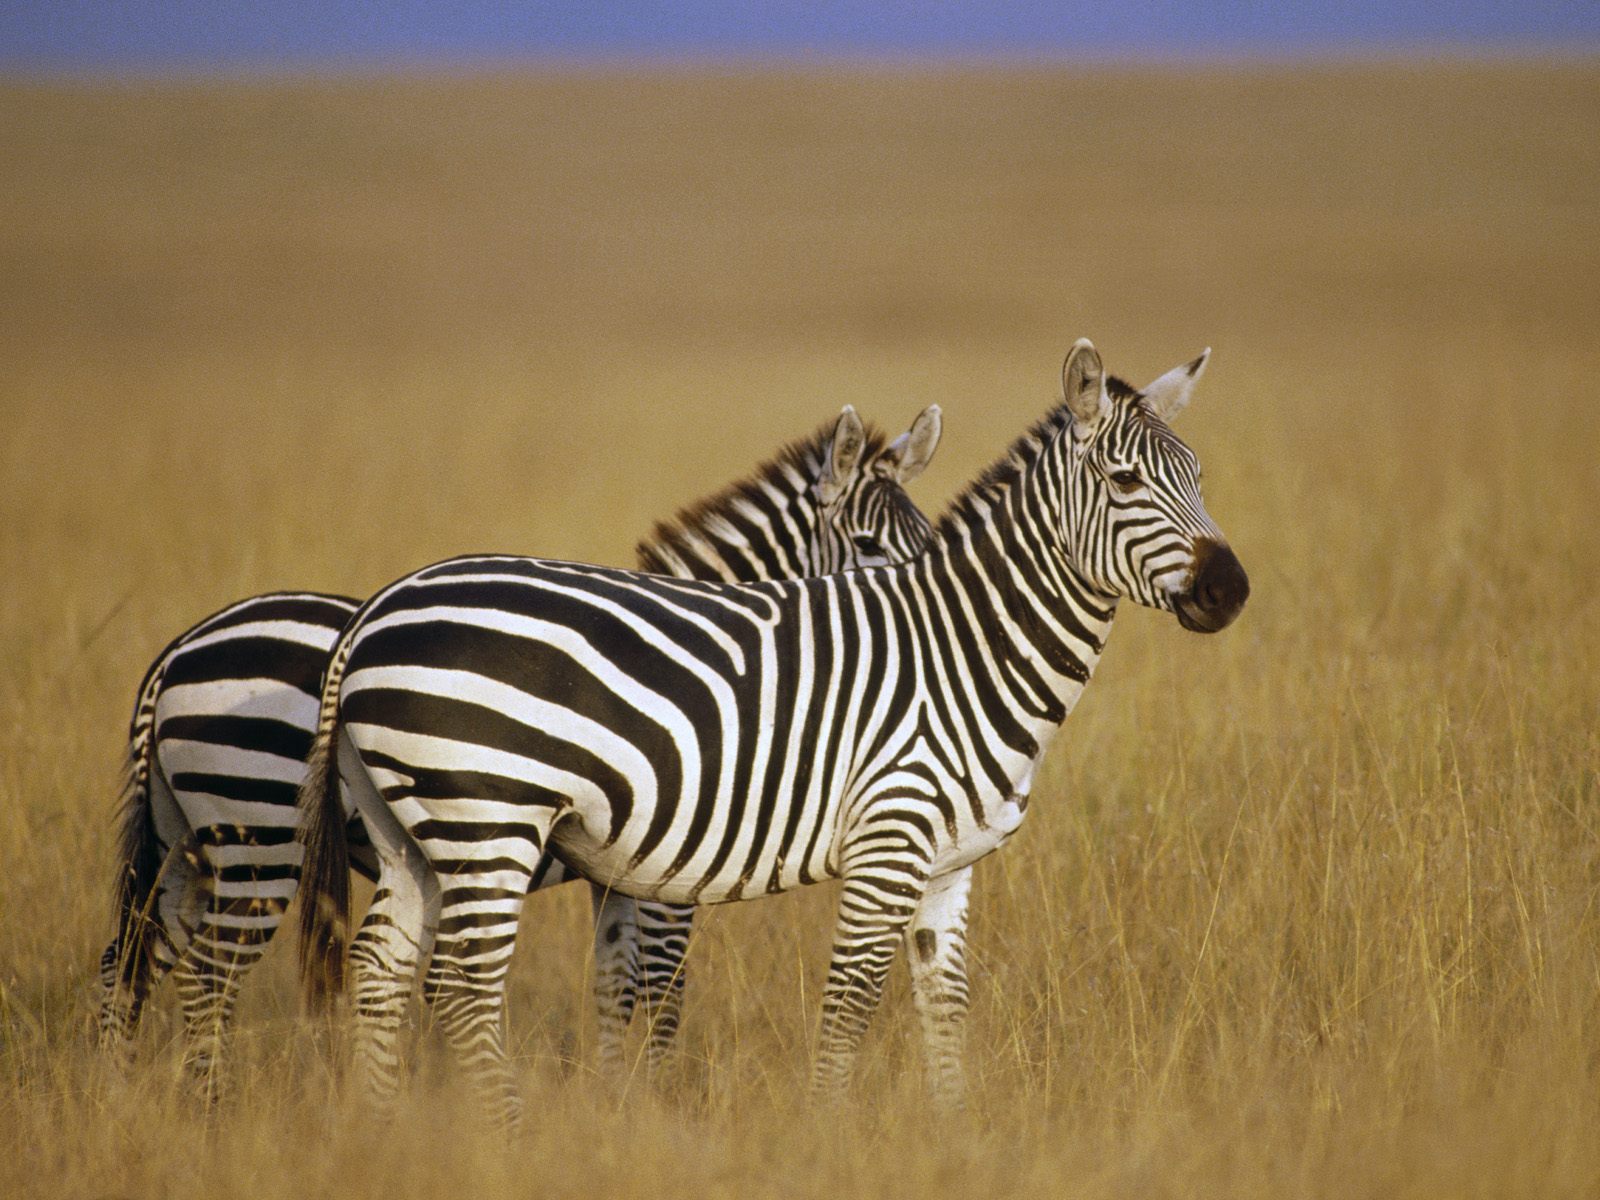 Great African Animal Wallpaper Pictures